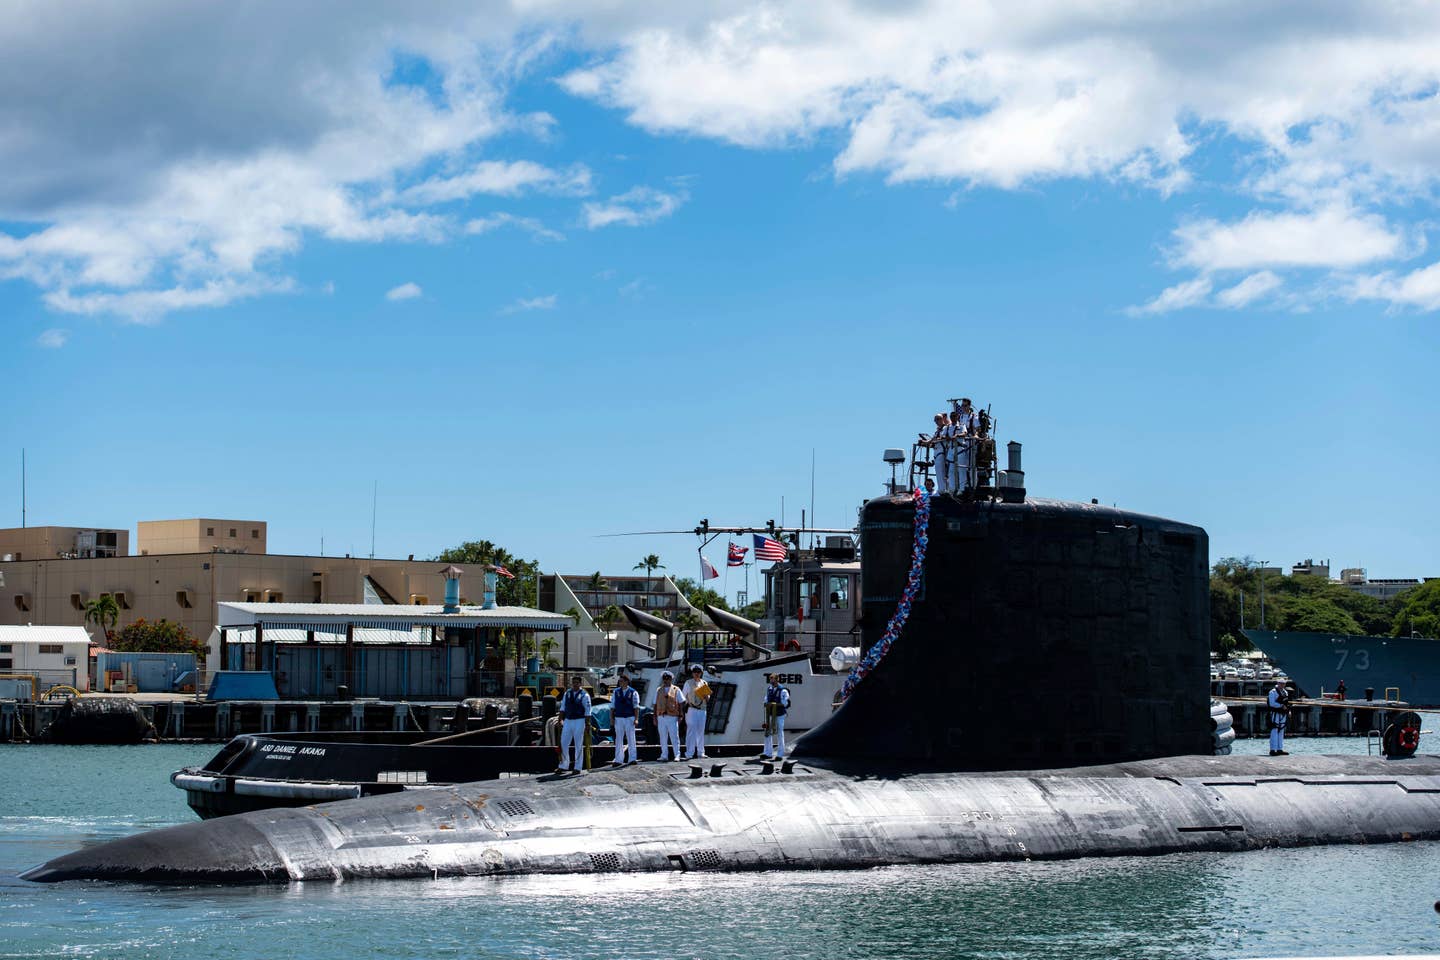 The Virginia-class fast-attack submarine USS Illinois (SSN 786) returns home to Joint Base Pearl Harbor-Hickam from a deployment in the 7th Fleet area of responsibility on Sept. 13, 2021. (Mass Communication Specialist 1st Class Michael B. Zingaro/U.S. Navy via AP)